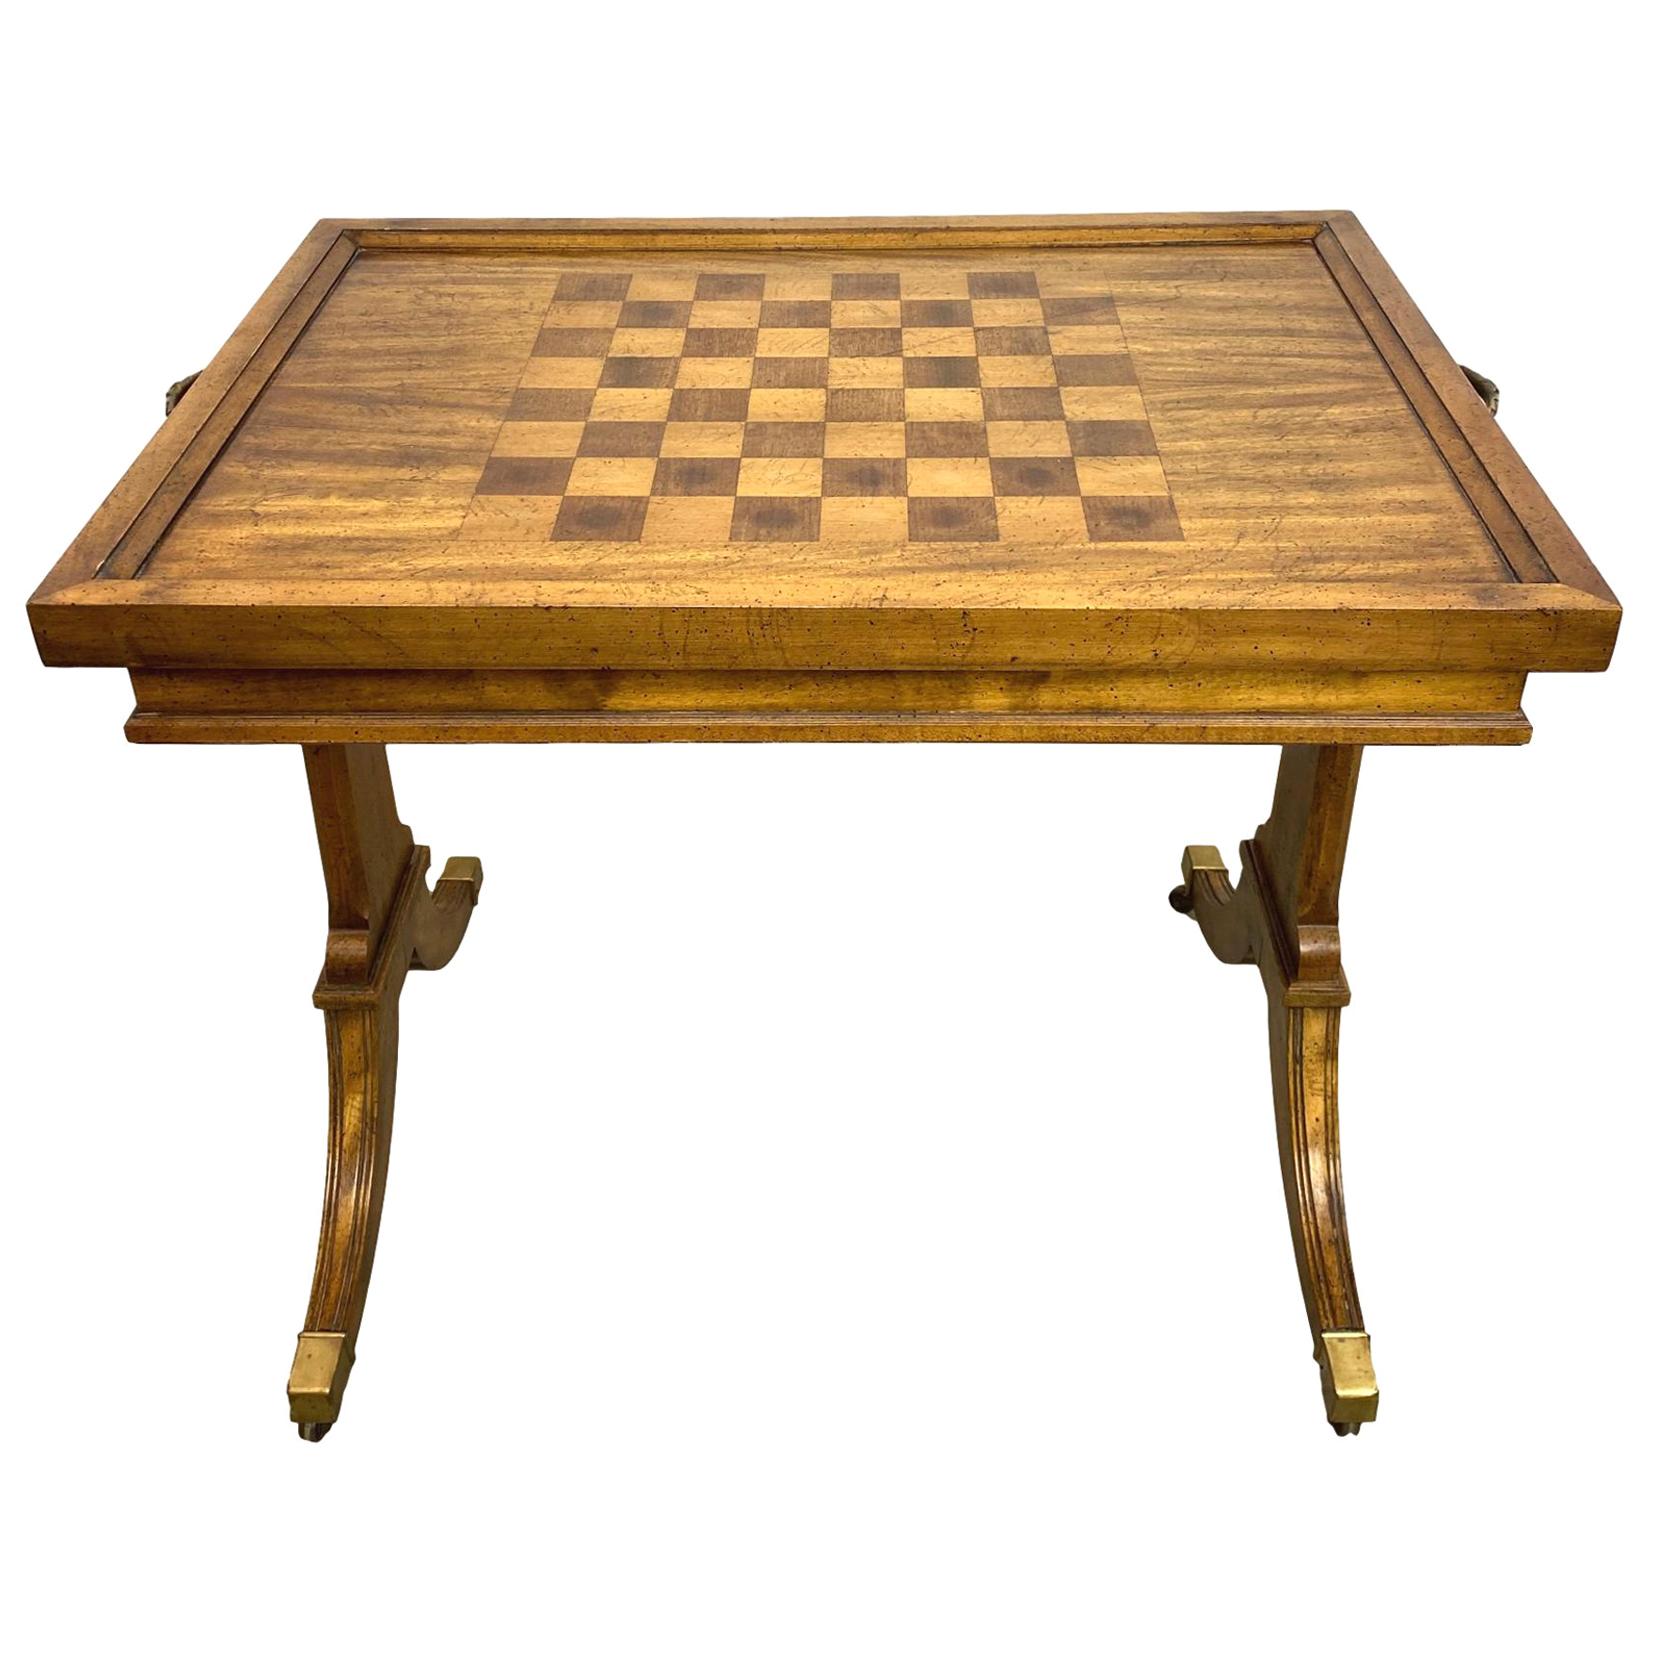 Walnut Convertible Inlaid Chess Table/Tea Table with Backgammon Board Interior